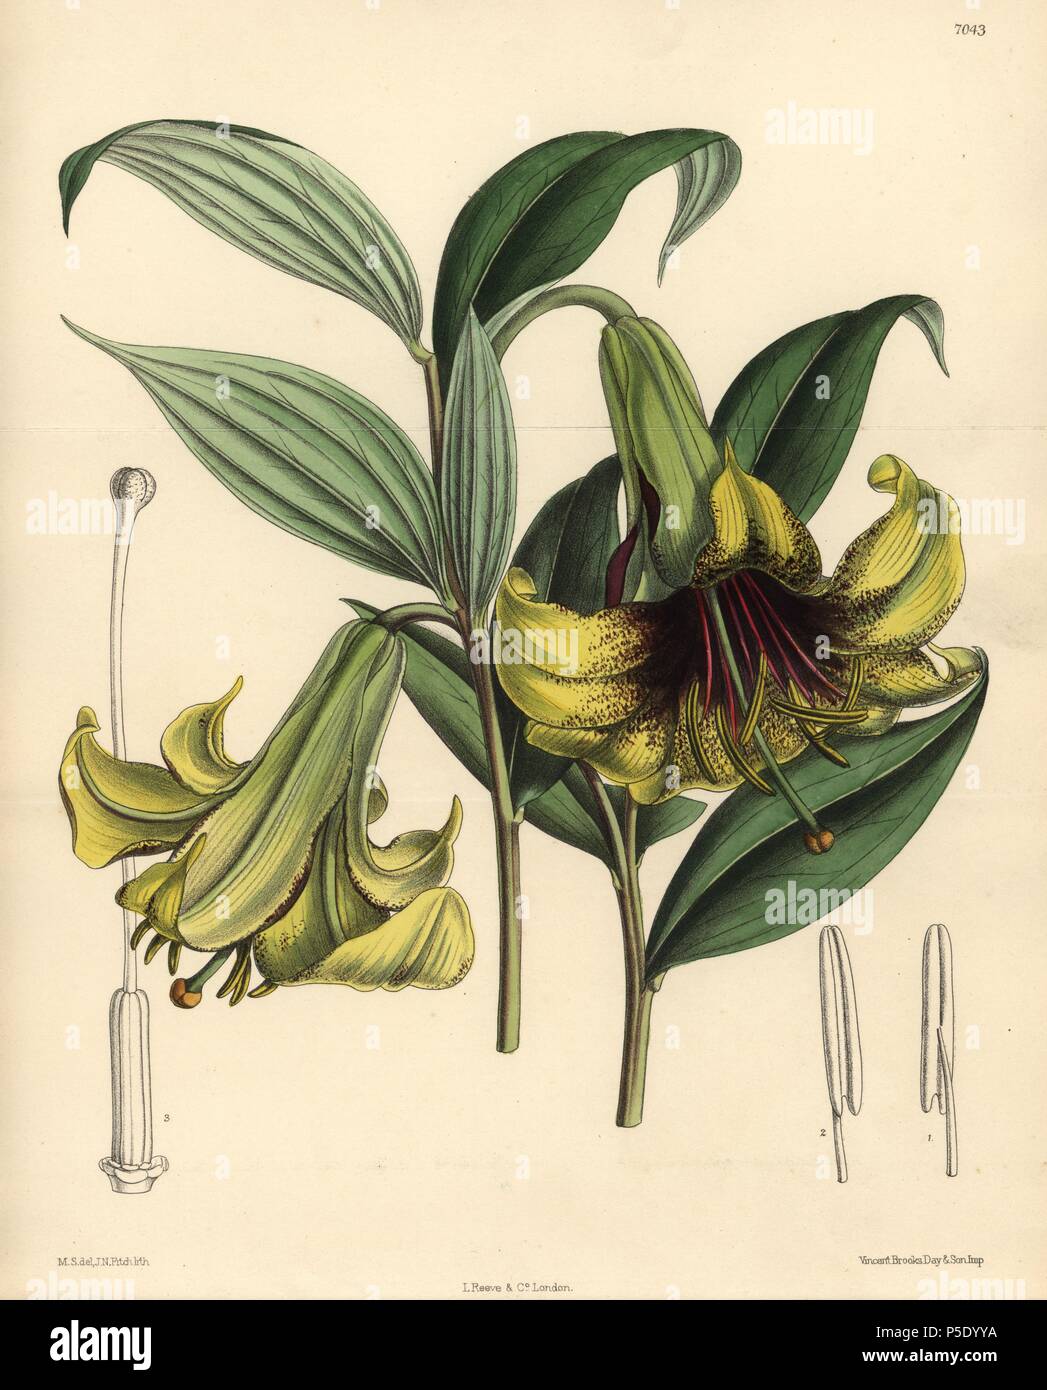 Lilium nepalense, yellow lily native to the Himalayas. Hand-coloured botanical illustration drawn by Matilda Smith and lithographed by J.N. Fitch from Joseph Dalton Hooker's 'Curtis's Botanical Magazine,' 1889, L. Reeve & Co. A second-cousin and pupil of Sir Joseph Dalton Hooker, Matilda Smith (1854-1926) was the main artist for the Botanical Magazine from 1887 until 1920 and contributed 2,300 illustrations. Stock Photo